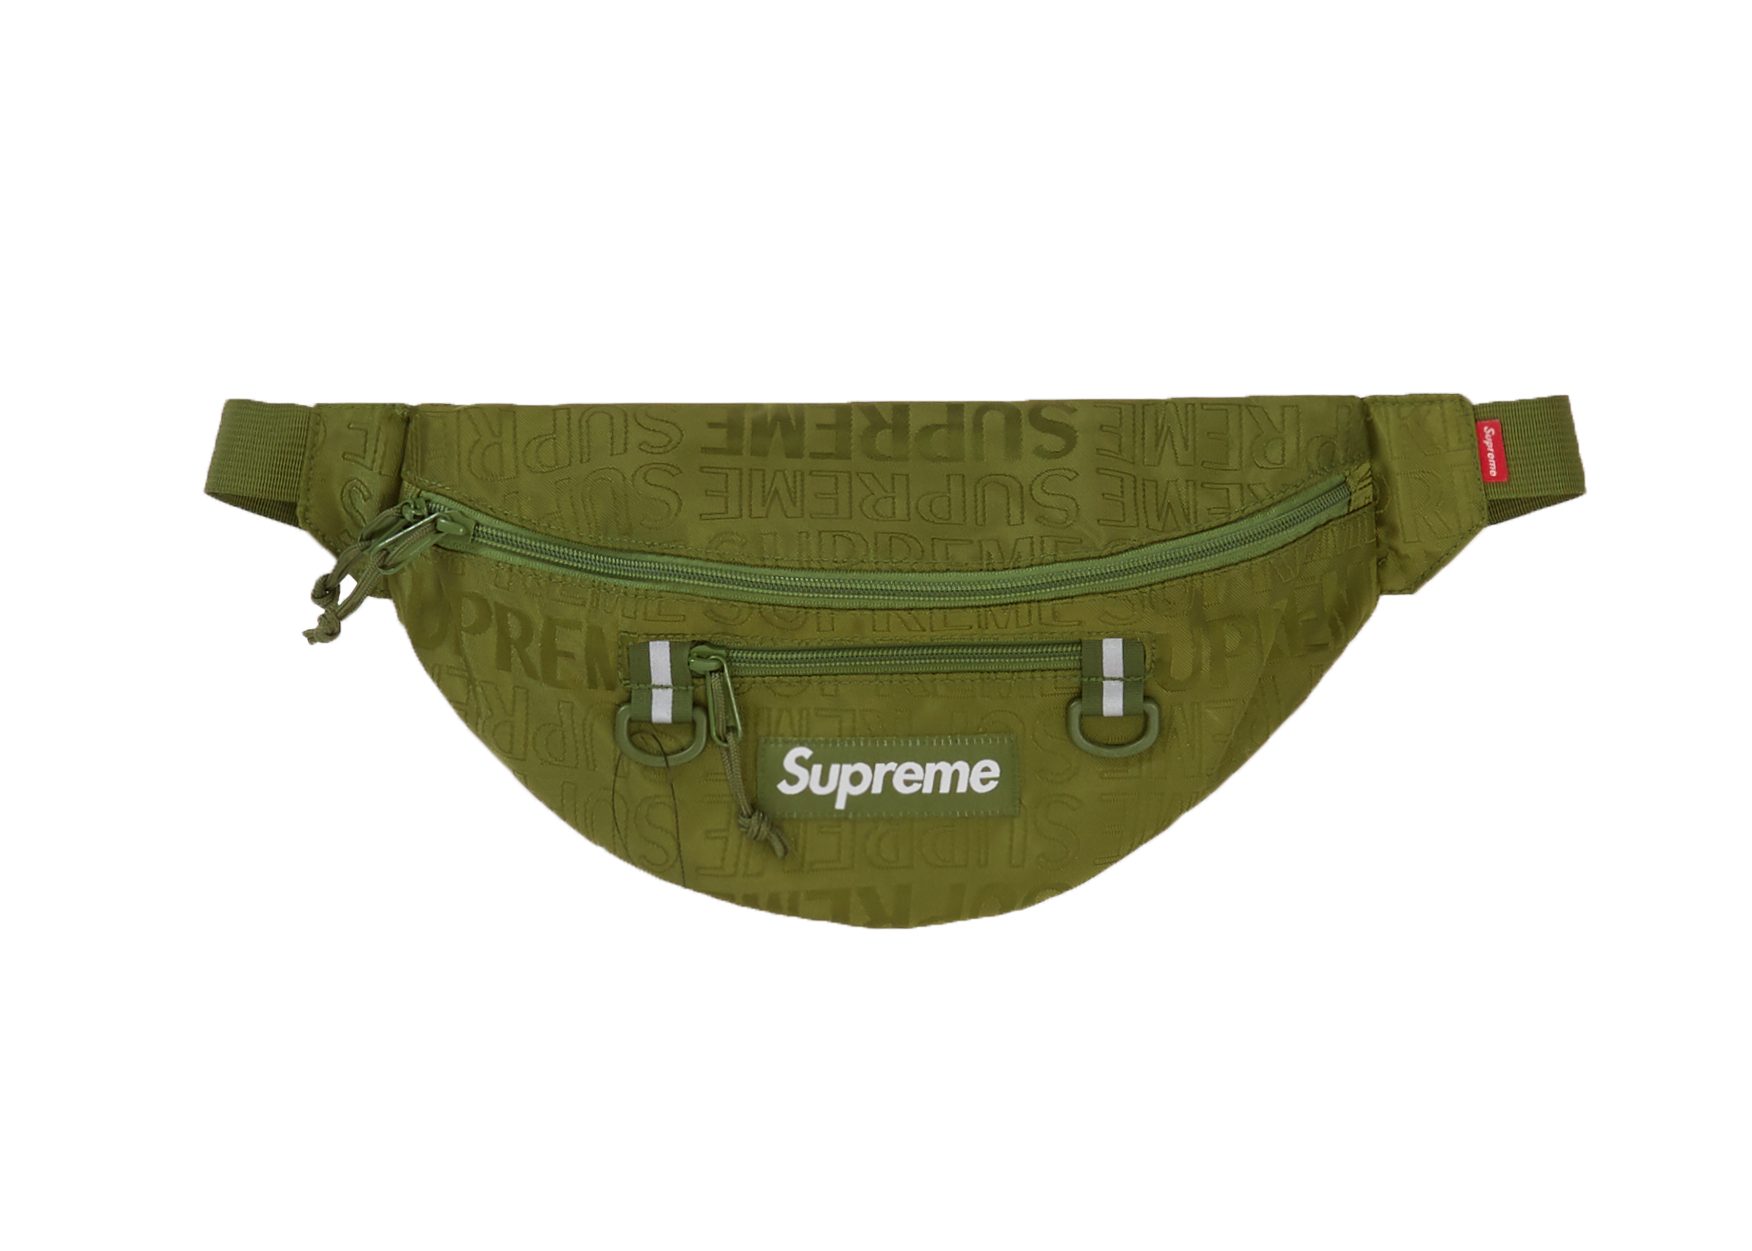 Buy Supreme Fanny Packs Accessories - StockX